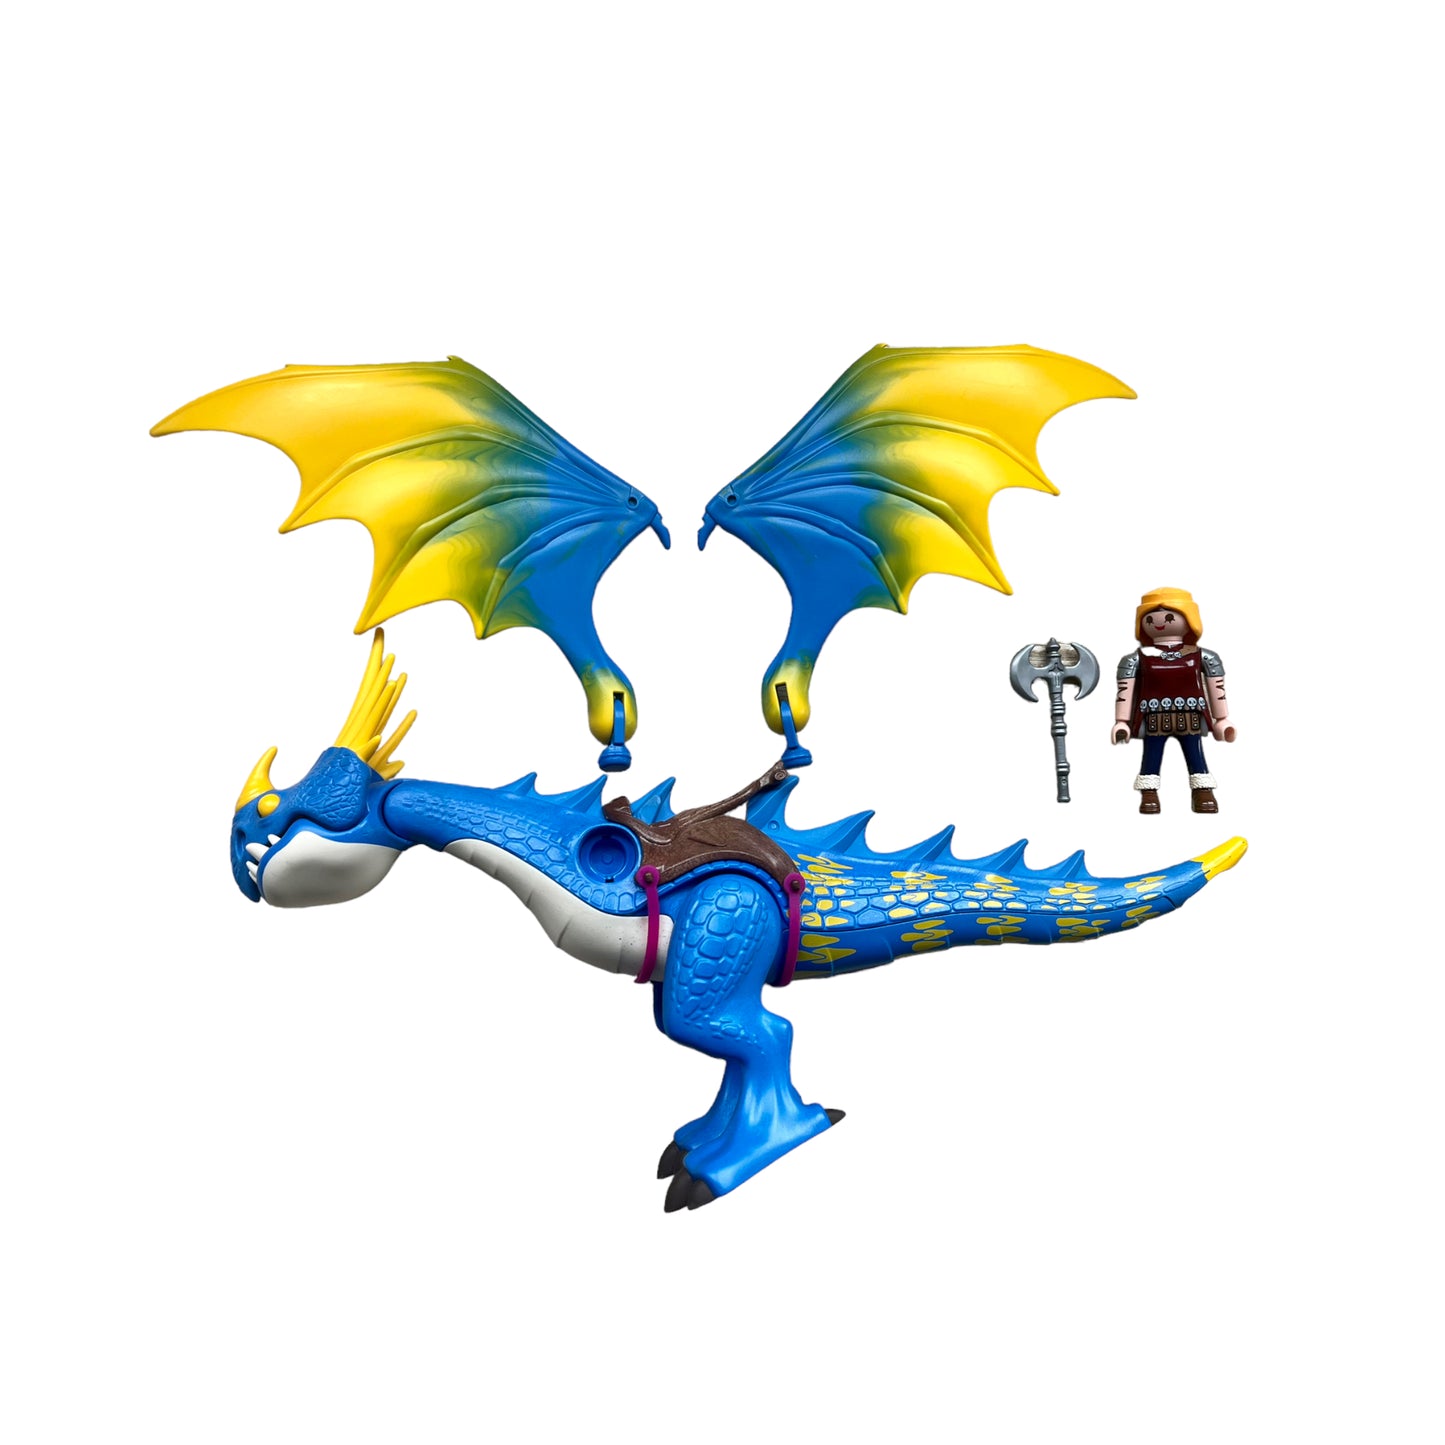 Playmobil ® Dragons - Astrid and Storm Arrow - 9247